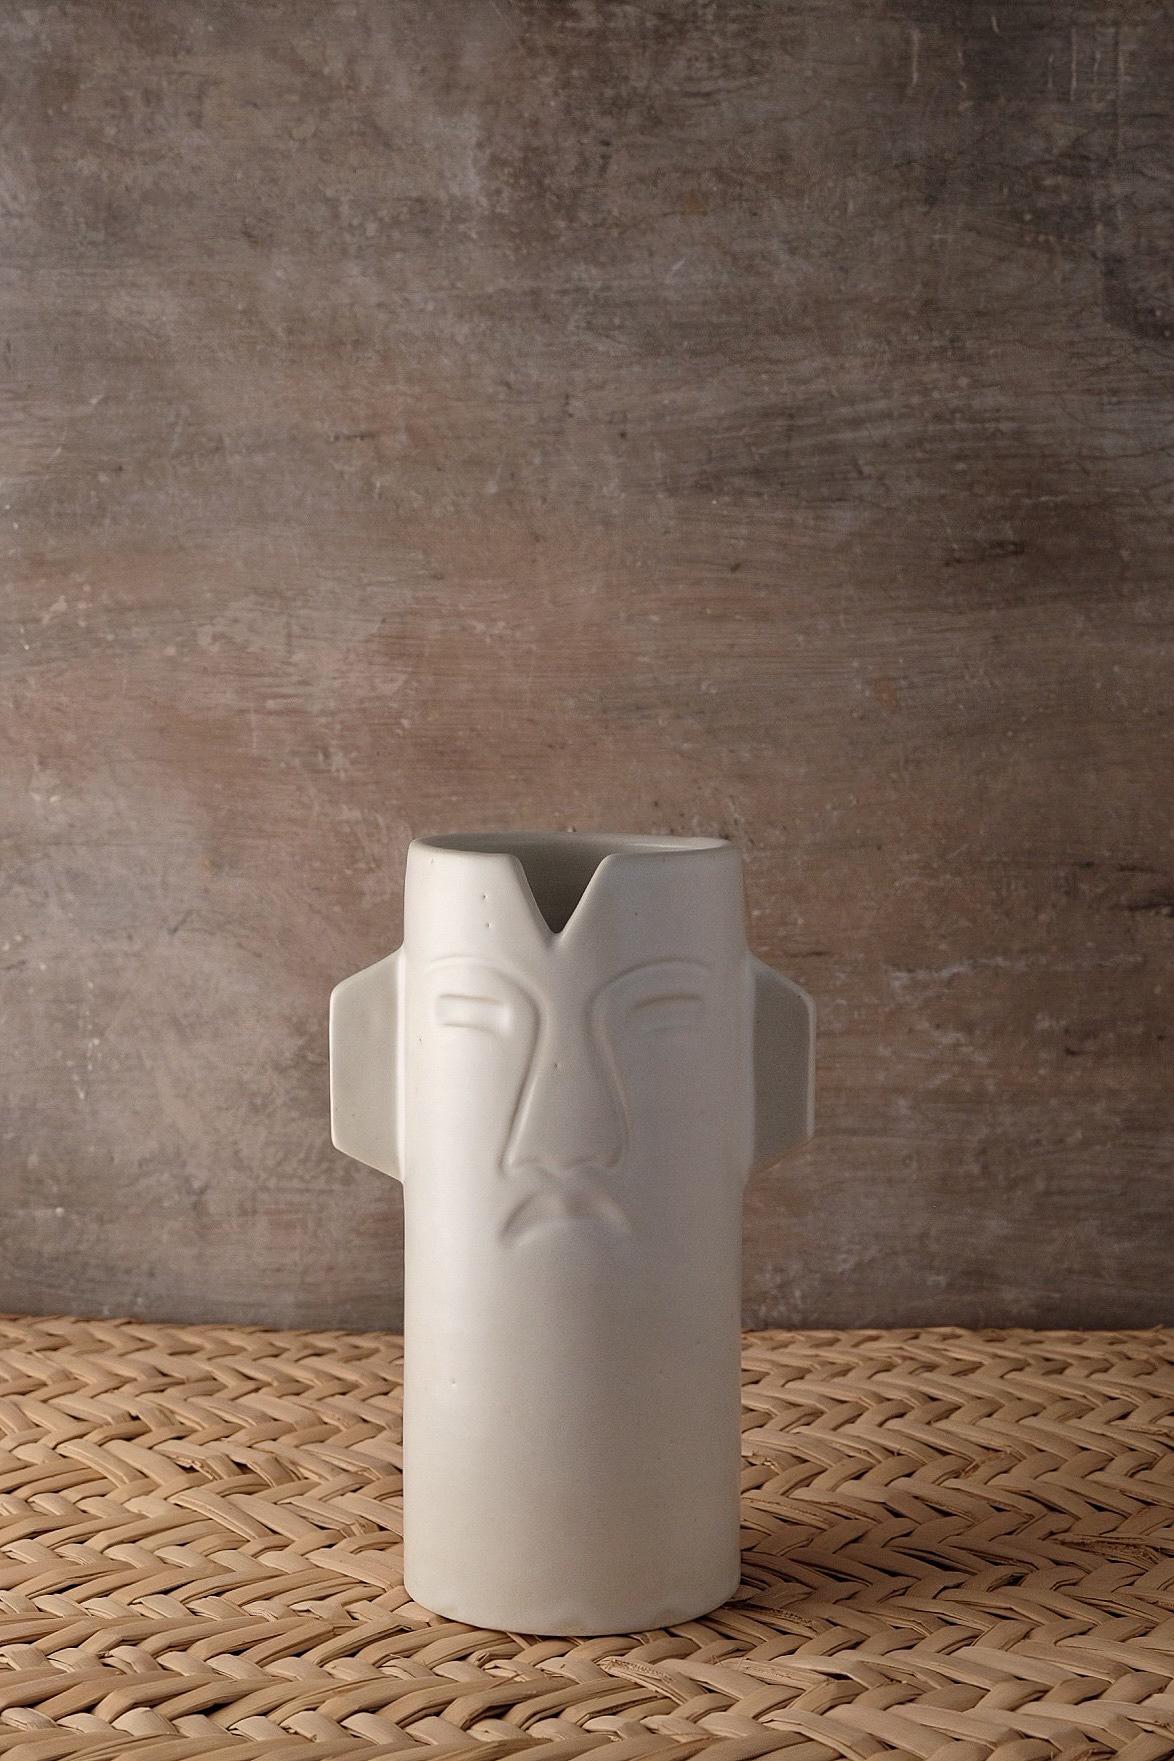 Mexican Chac Ceramic Vase by Onora For Sale